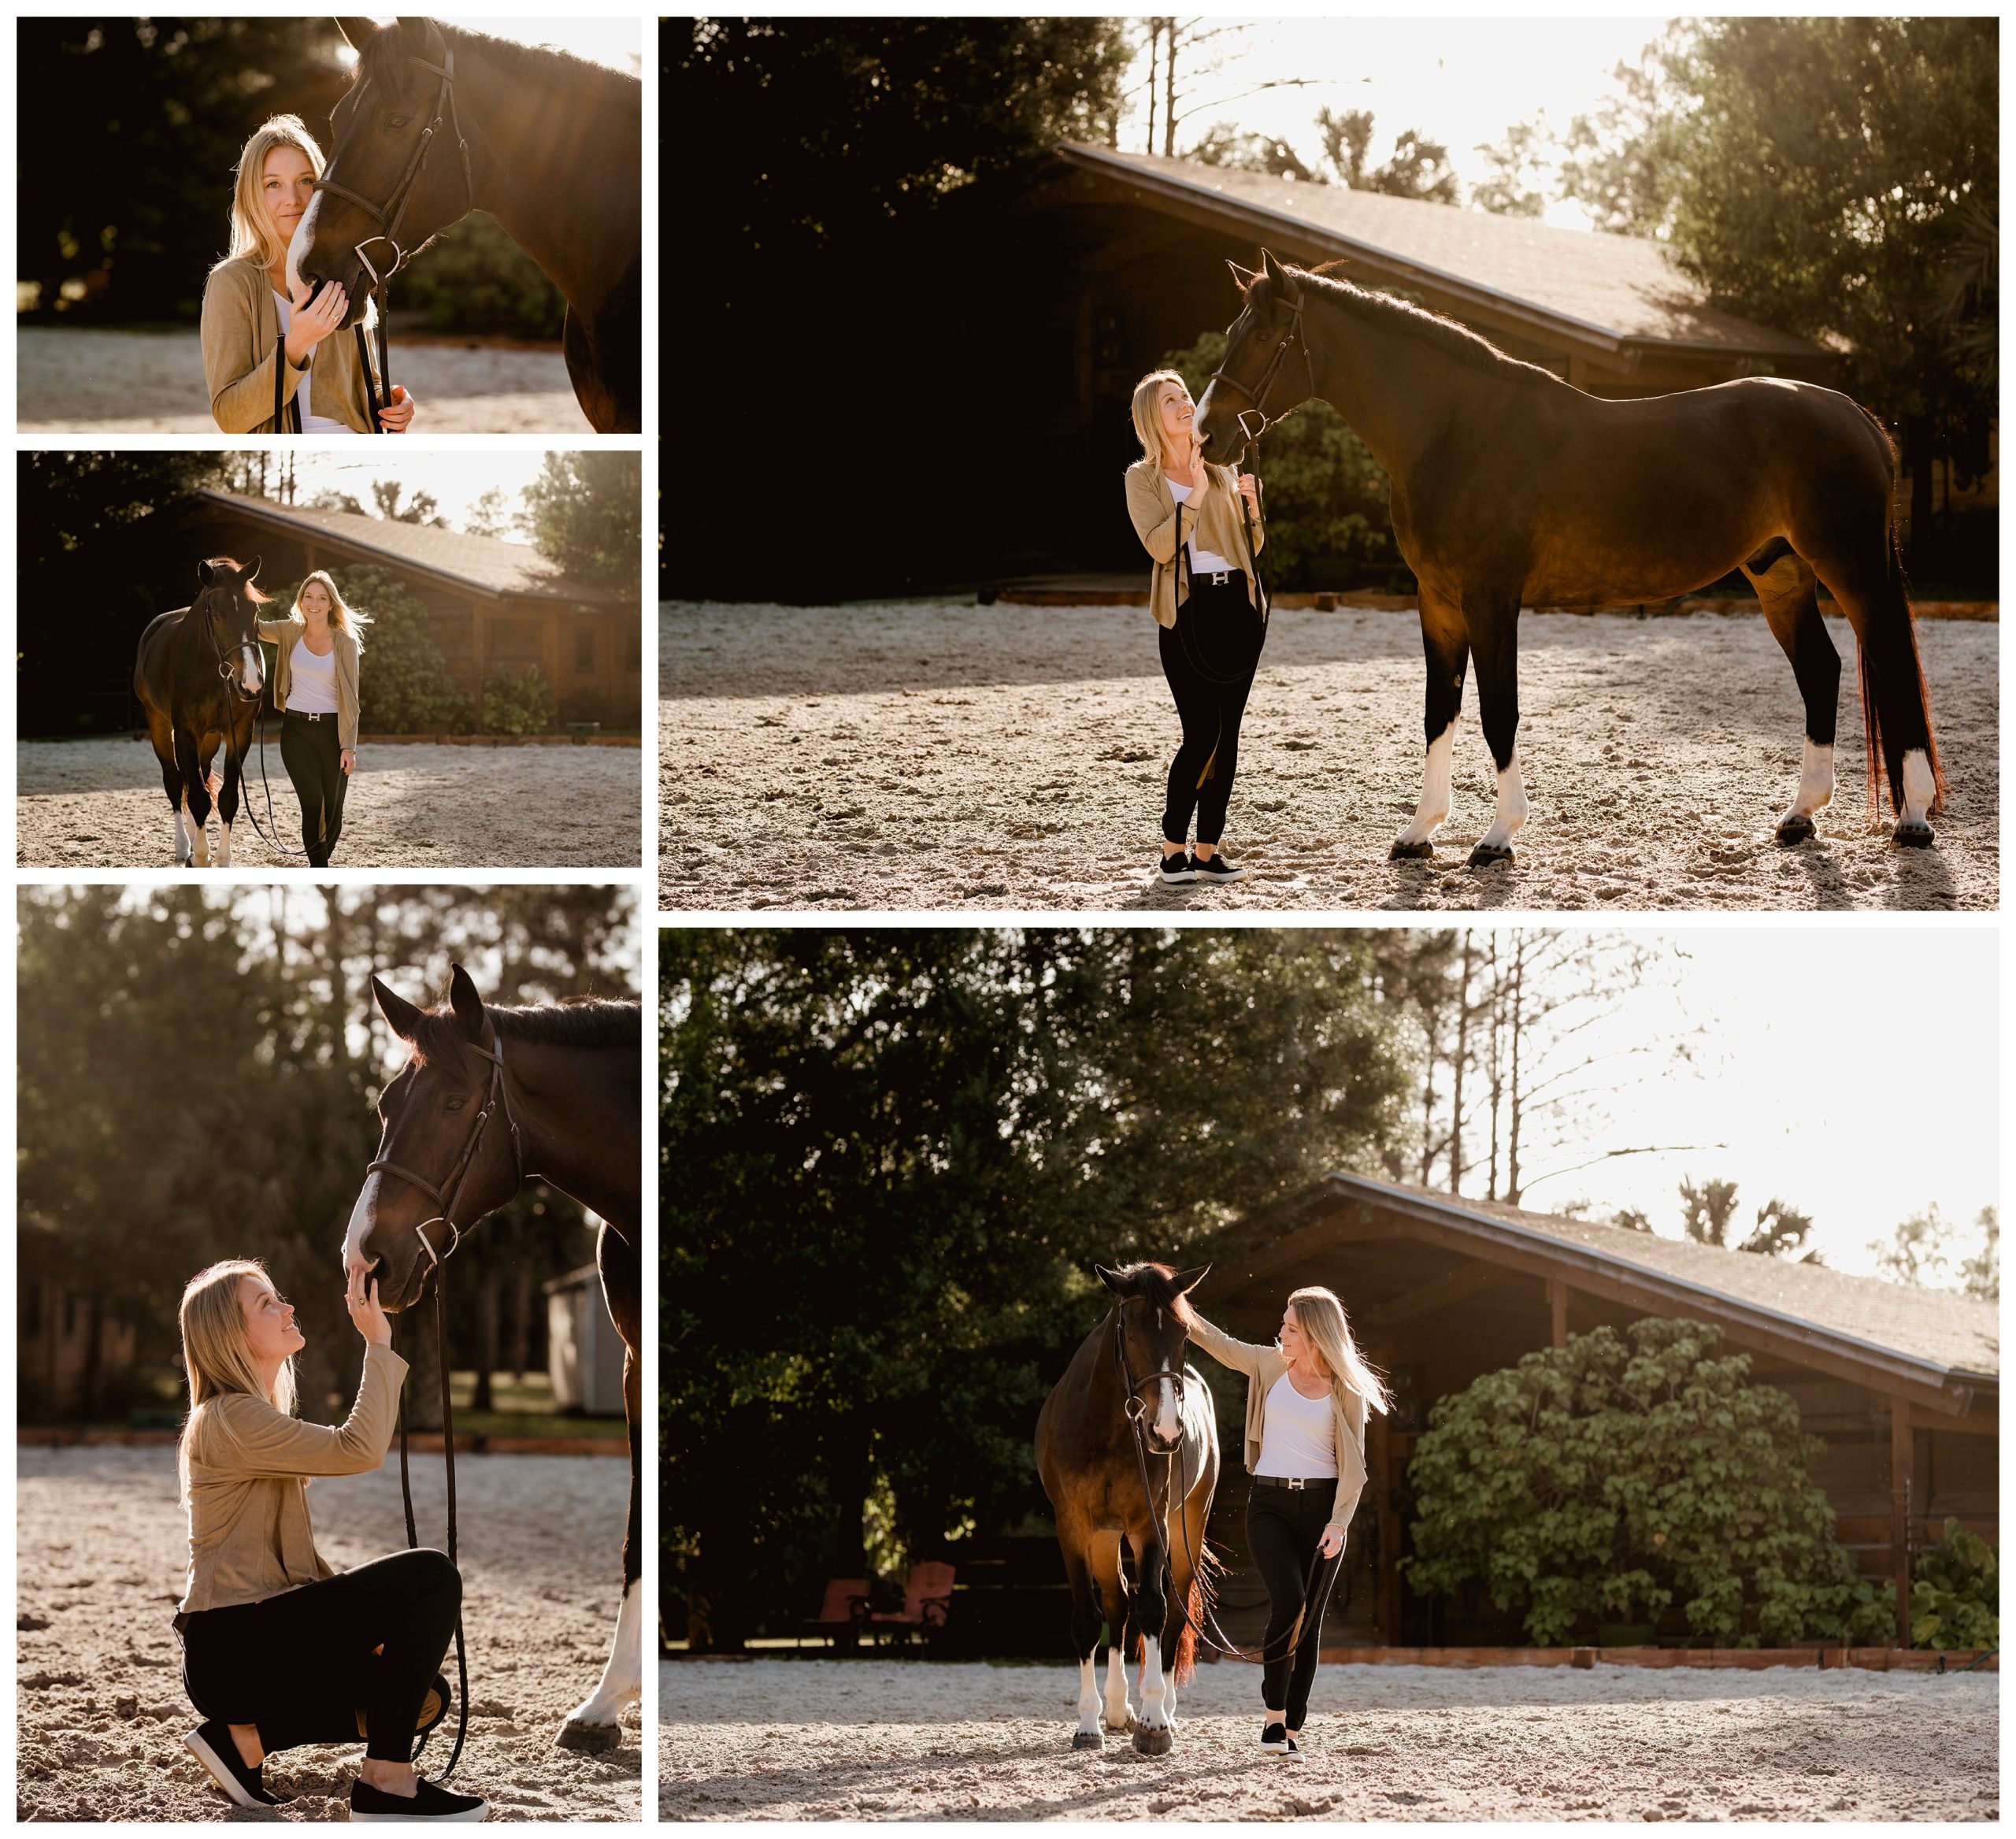 Lifestyle equestrian photographer in florida travels across the state to photograph floridians and their horses.